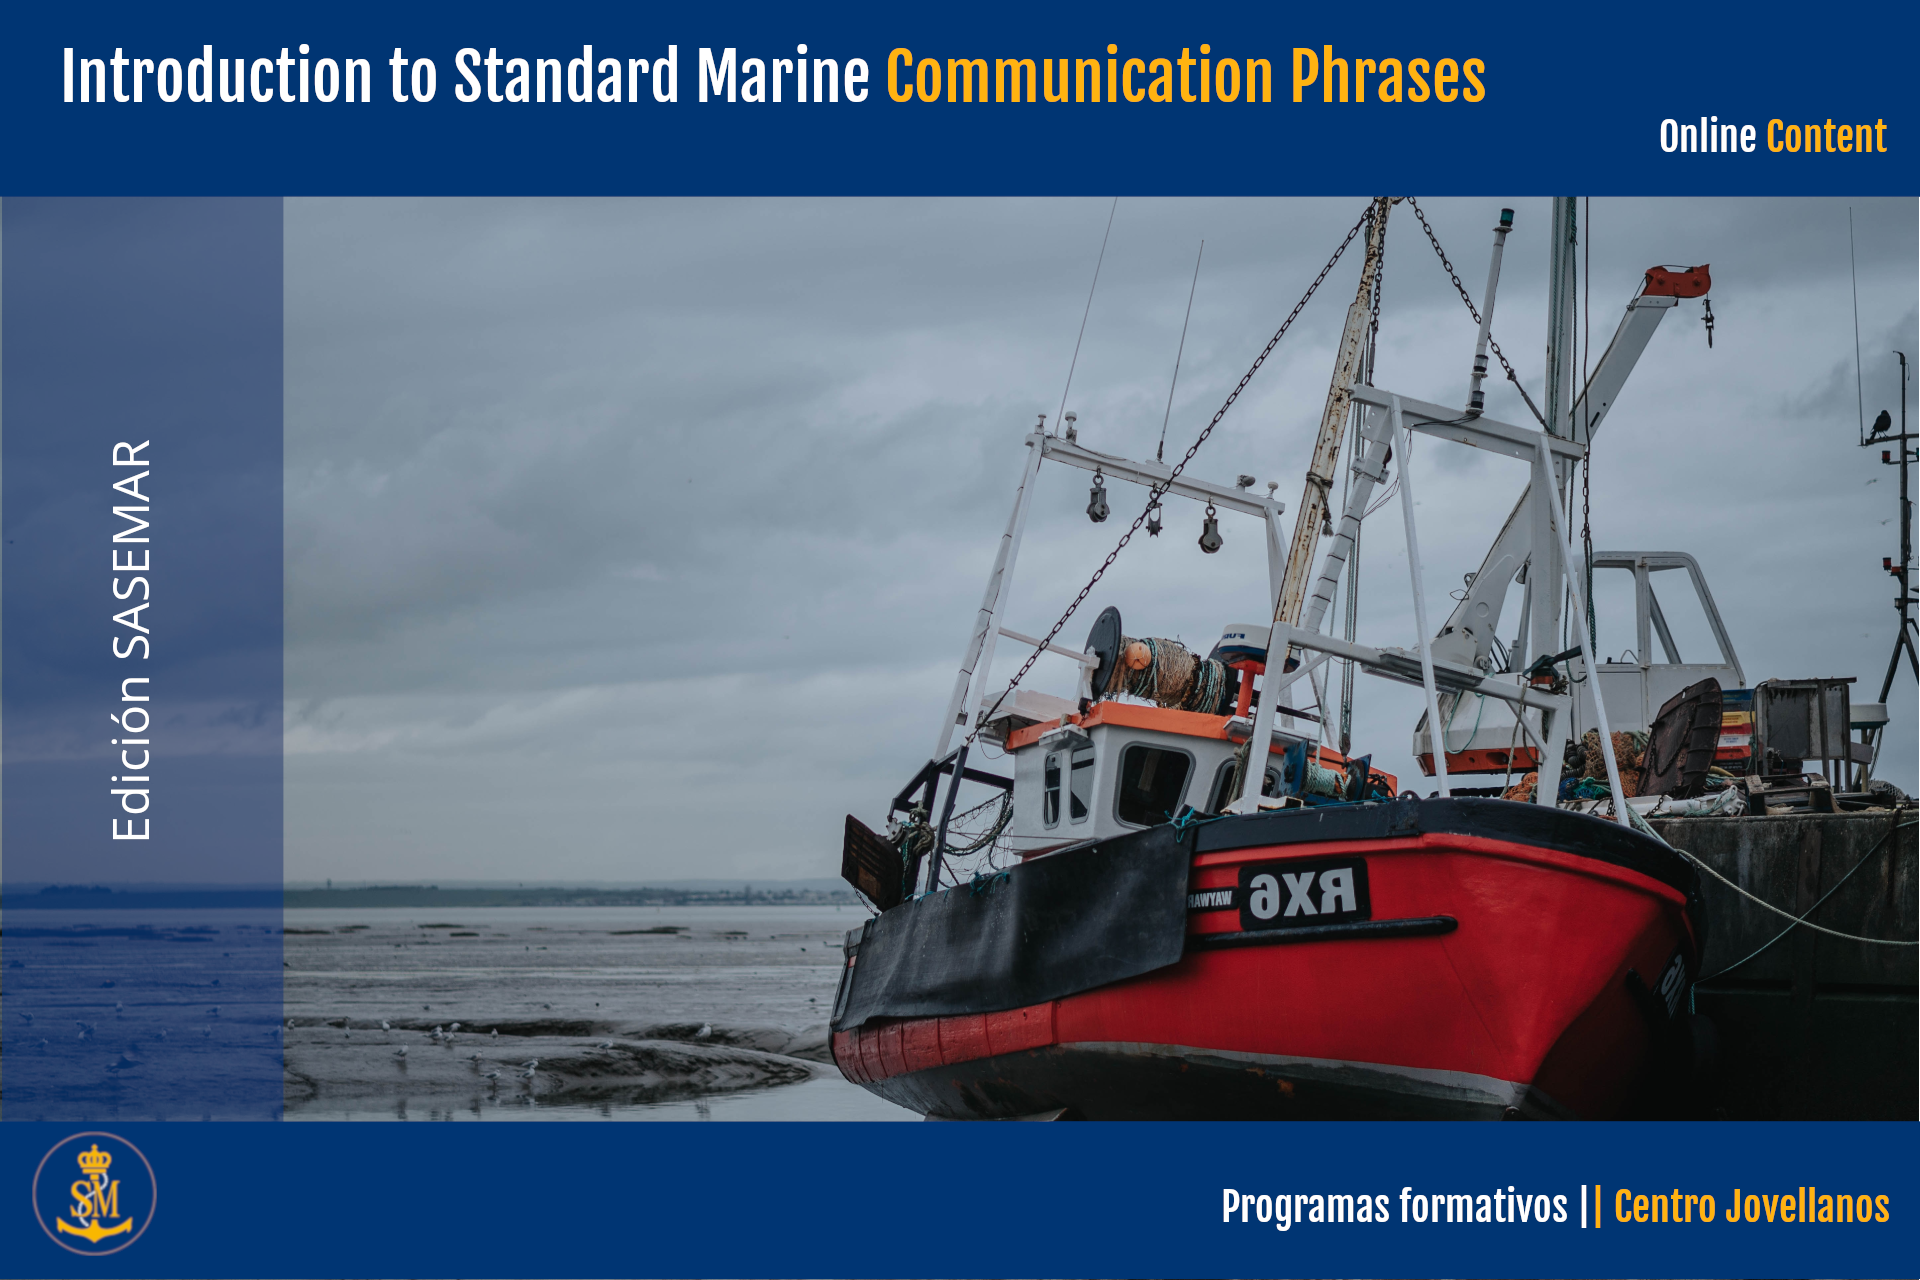 Introduction to Standard Marine Communication Phrases (SMCP)